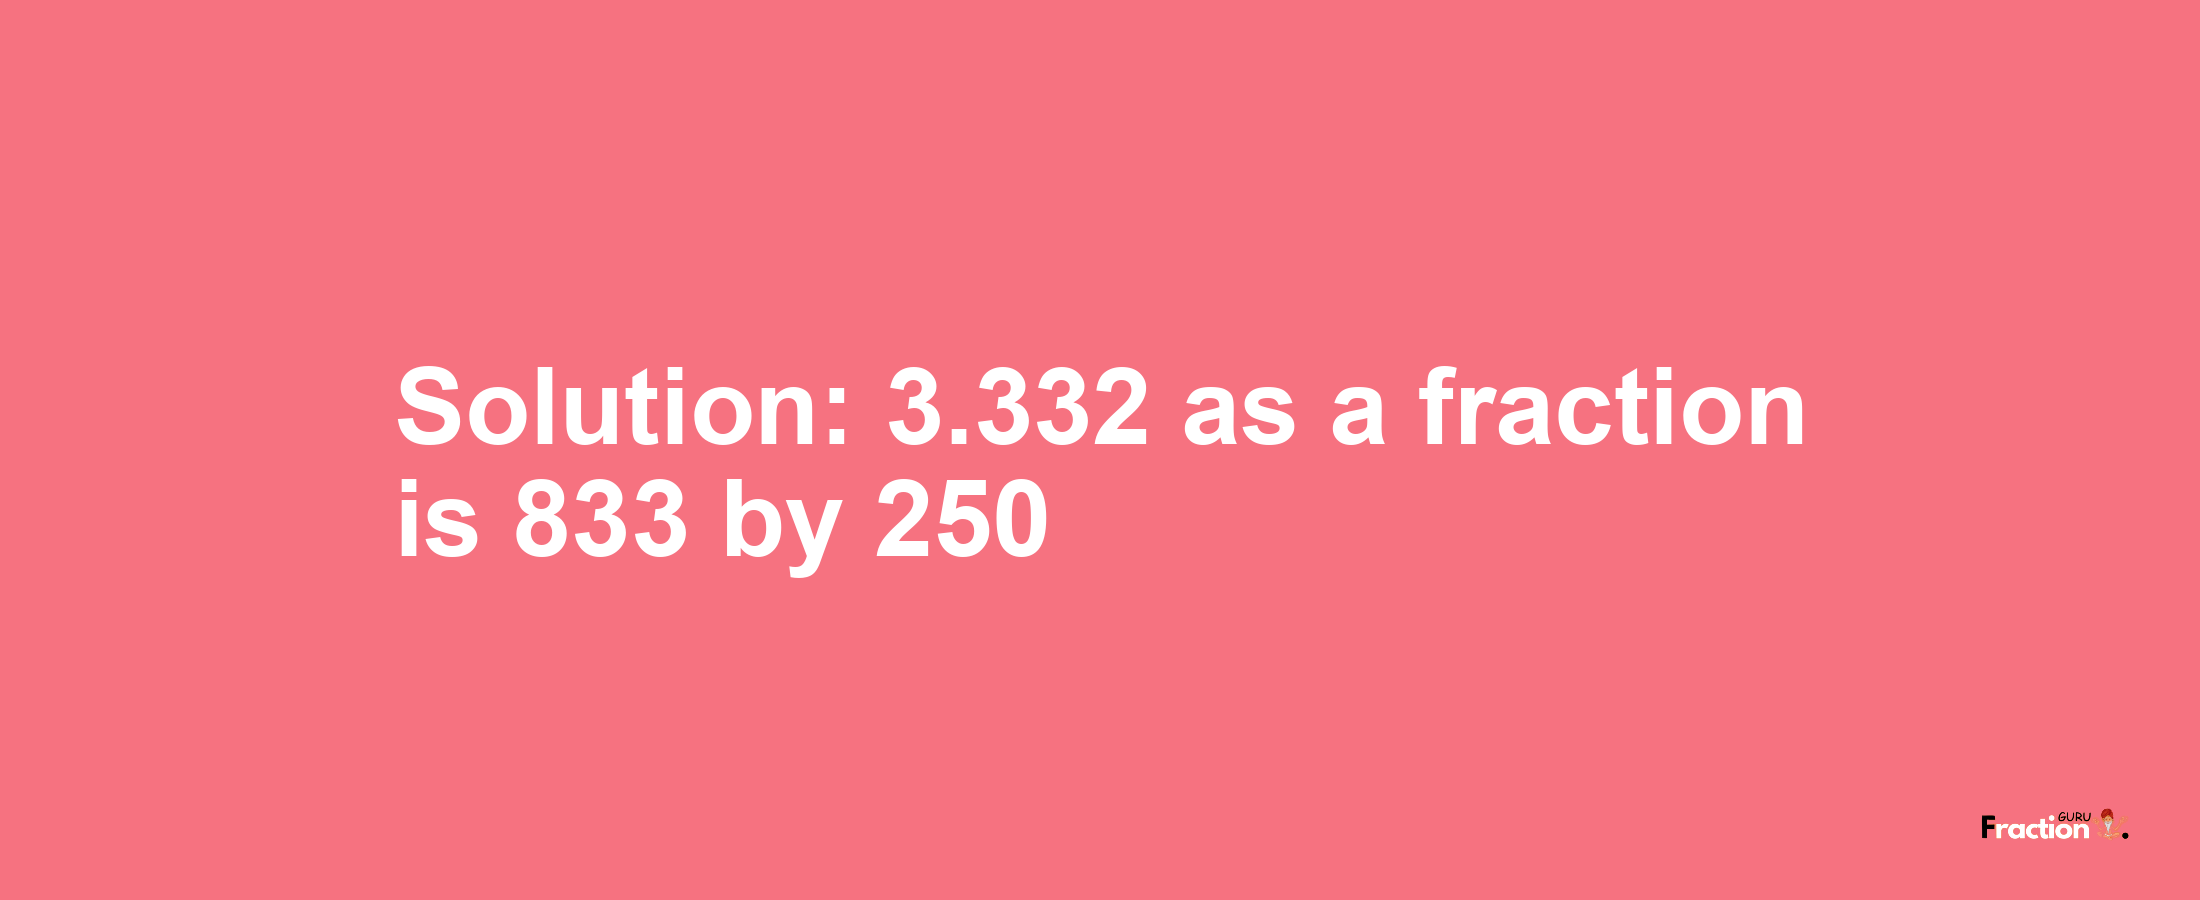 Solution:3.332 as a fraction is 833/250